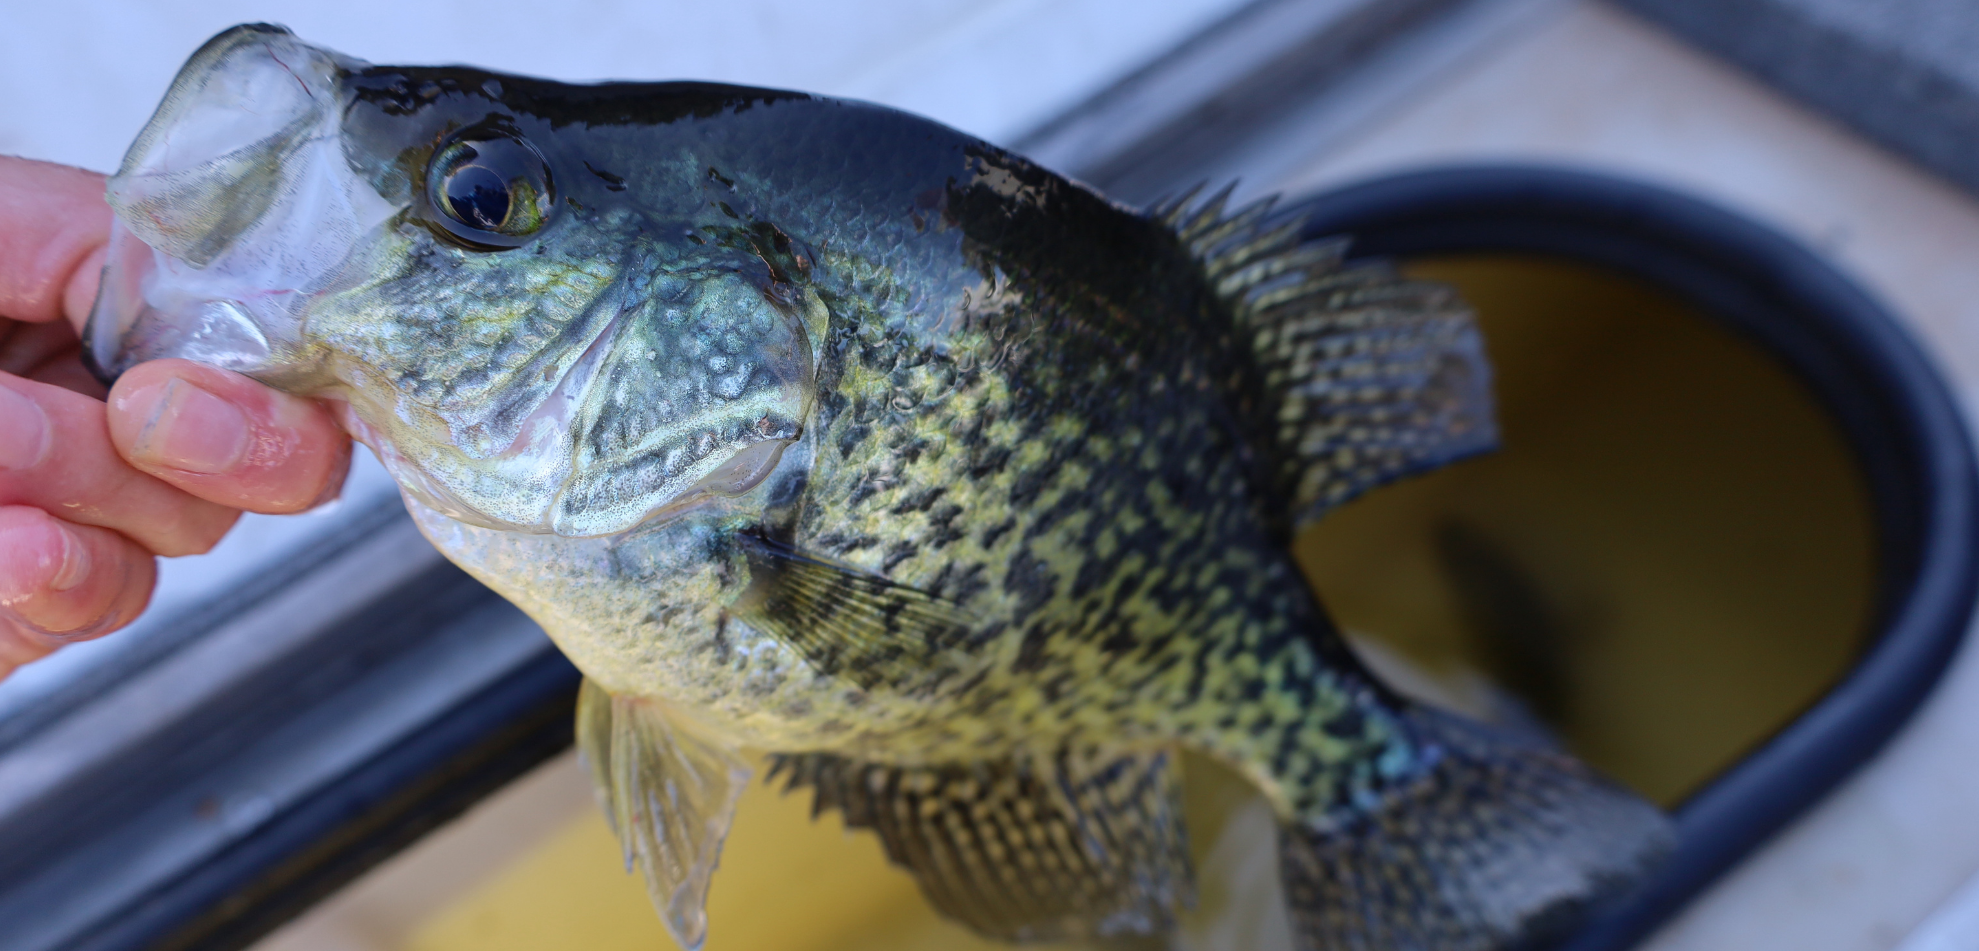 How to Catch, Clean, and Cook Early-Season Crappies